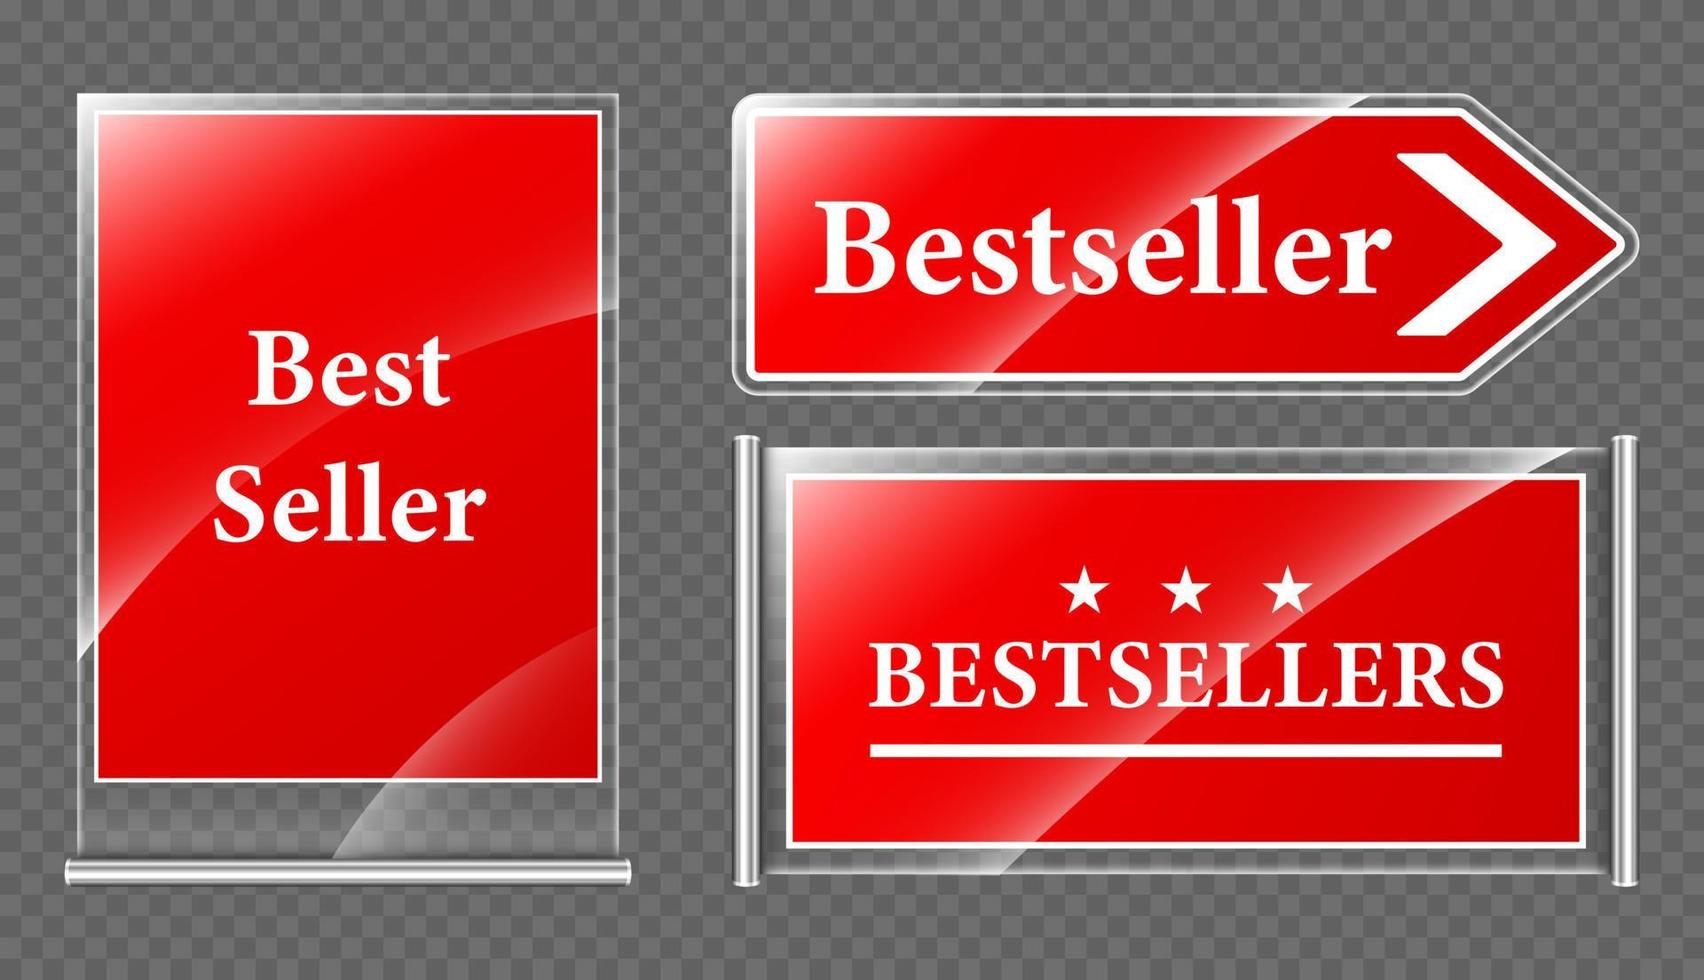 Best seller offer signboards and pointer icons set vector